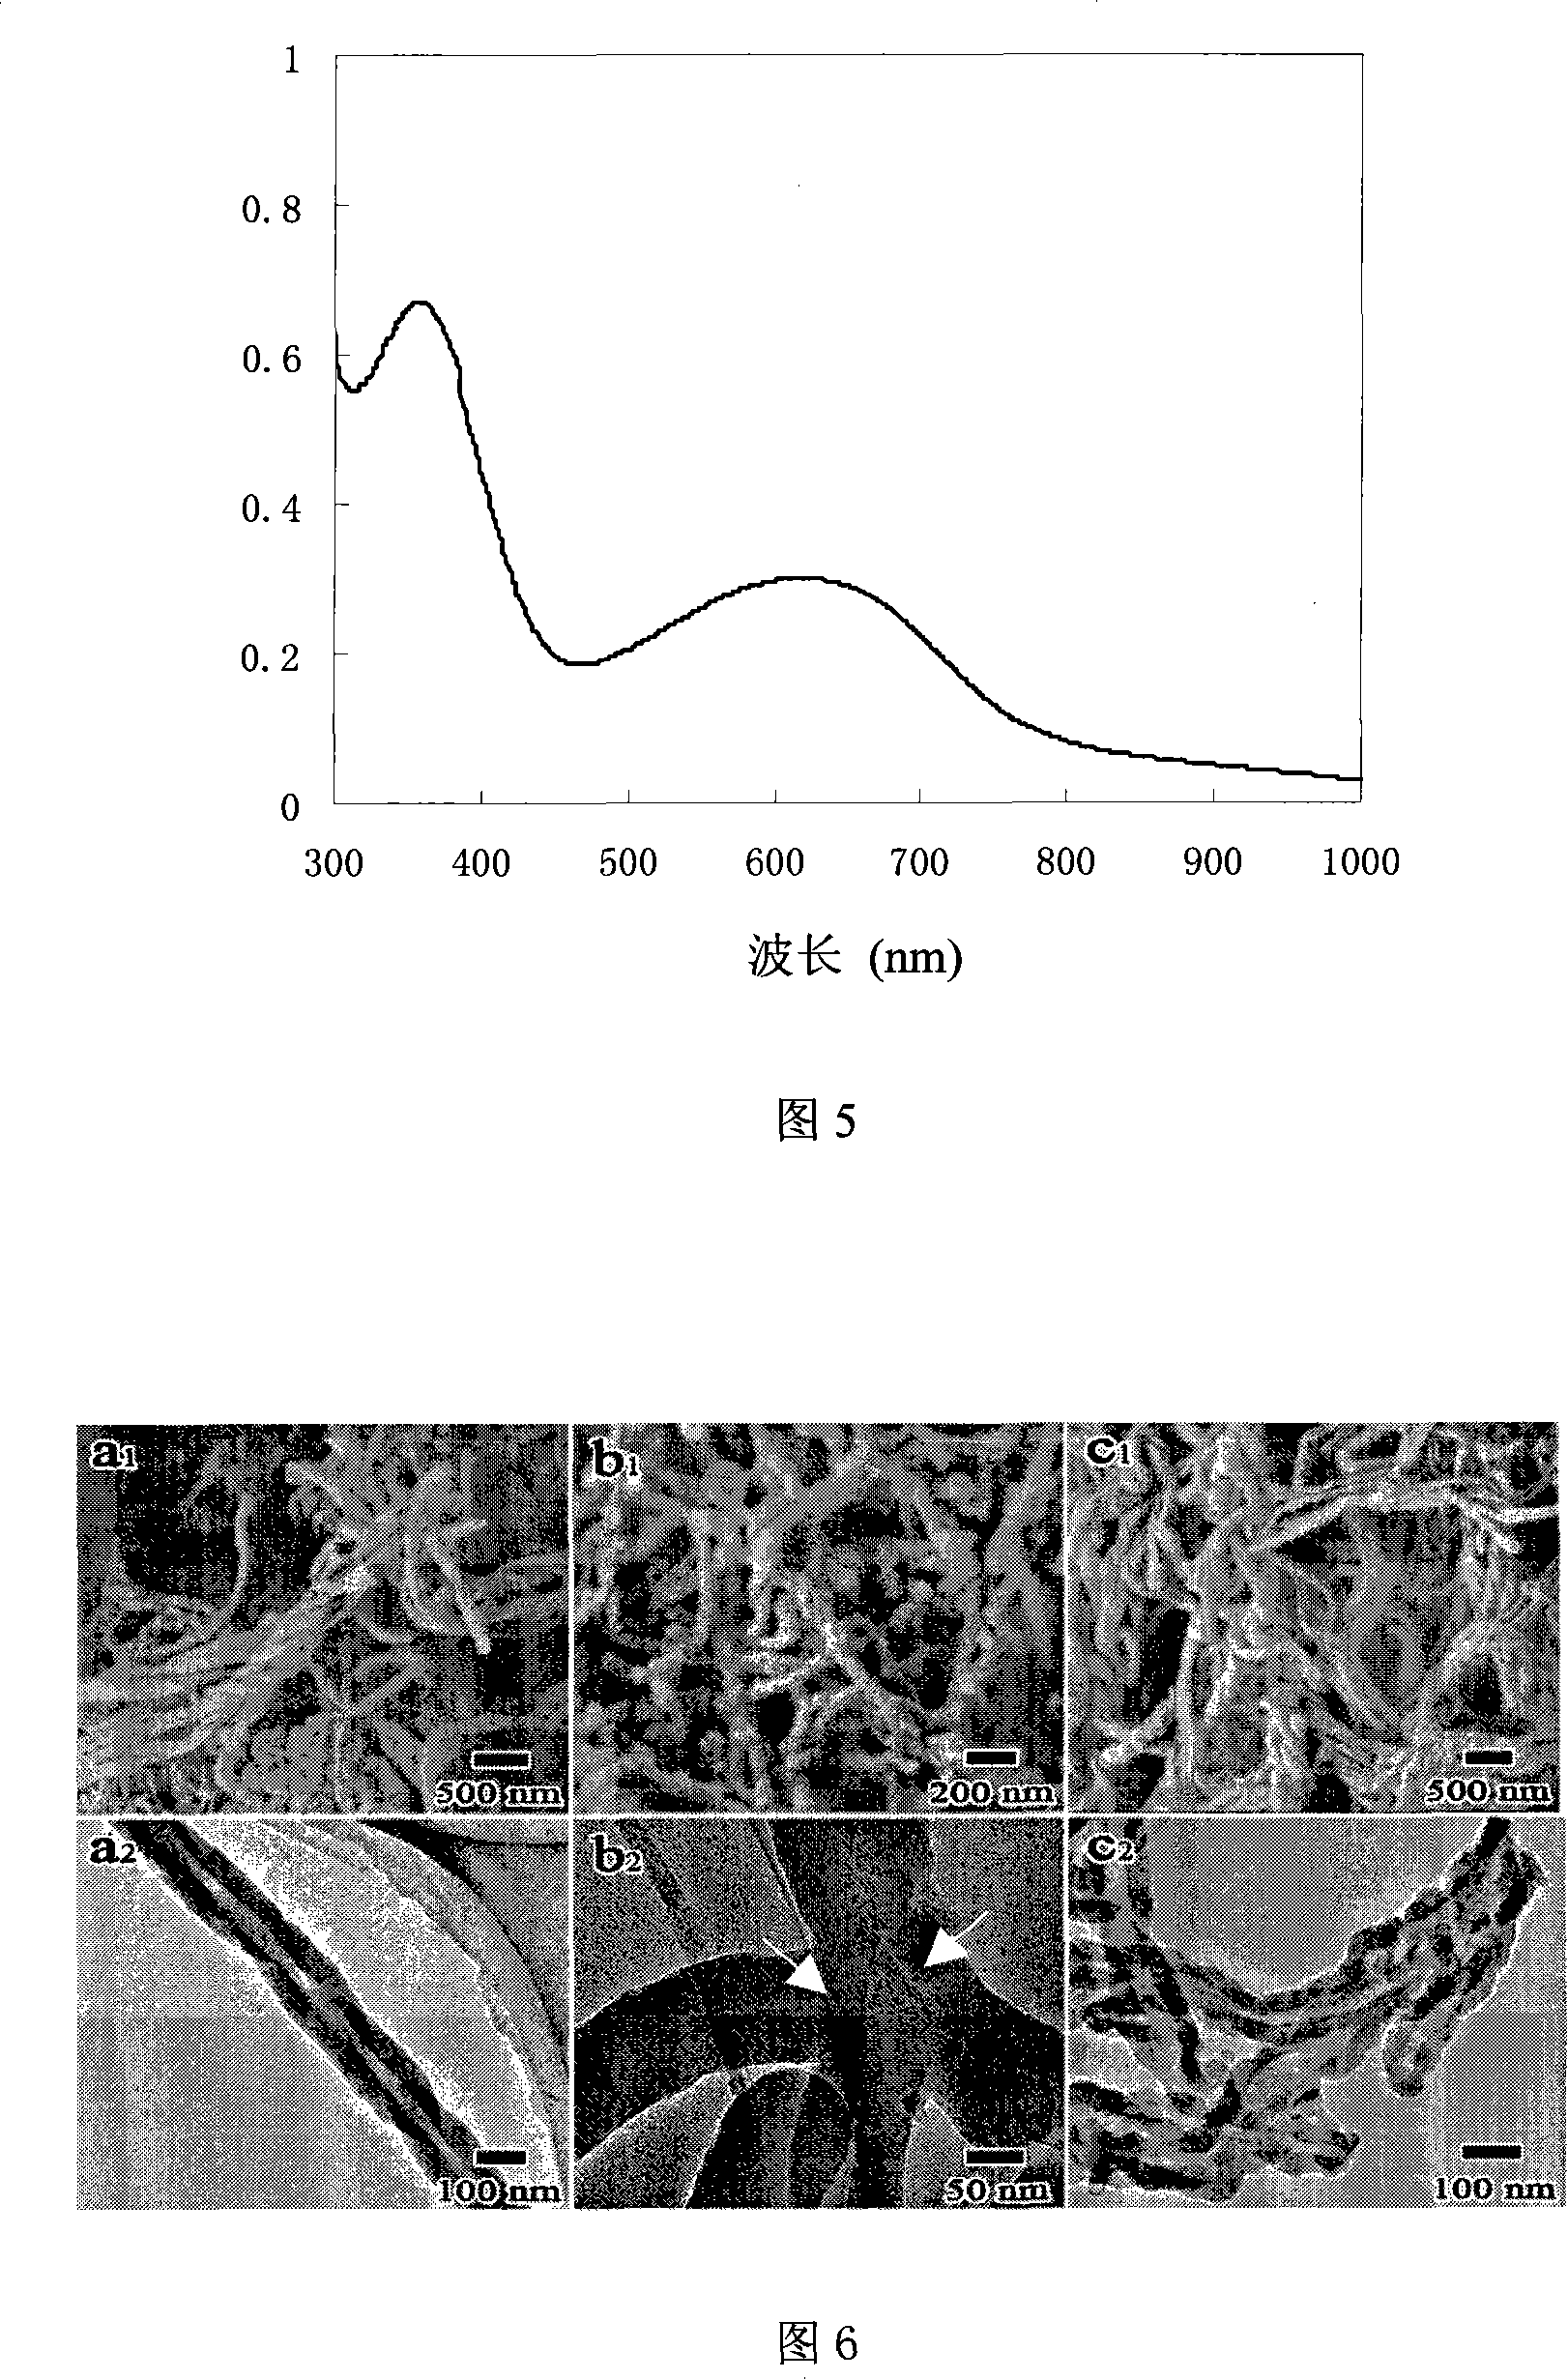 Chirality mesoporous organic polymer material with even and adjustable diameter and method for producing the same